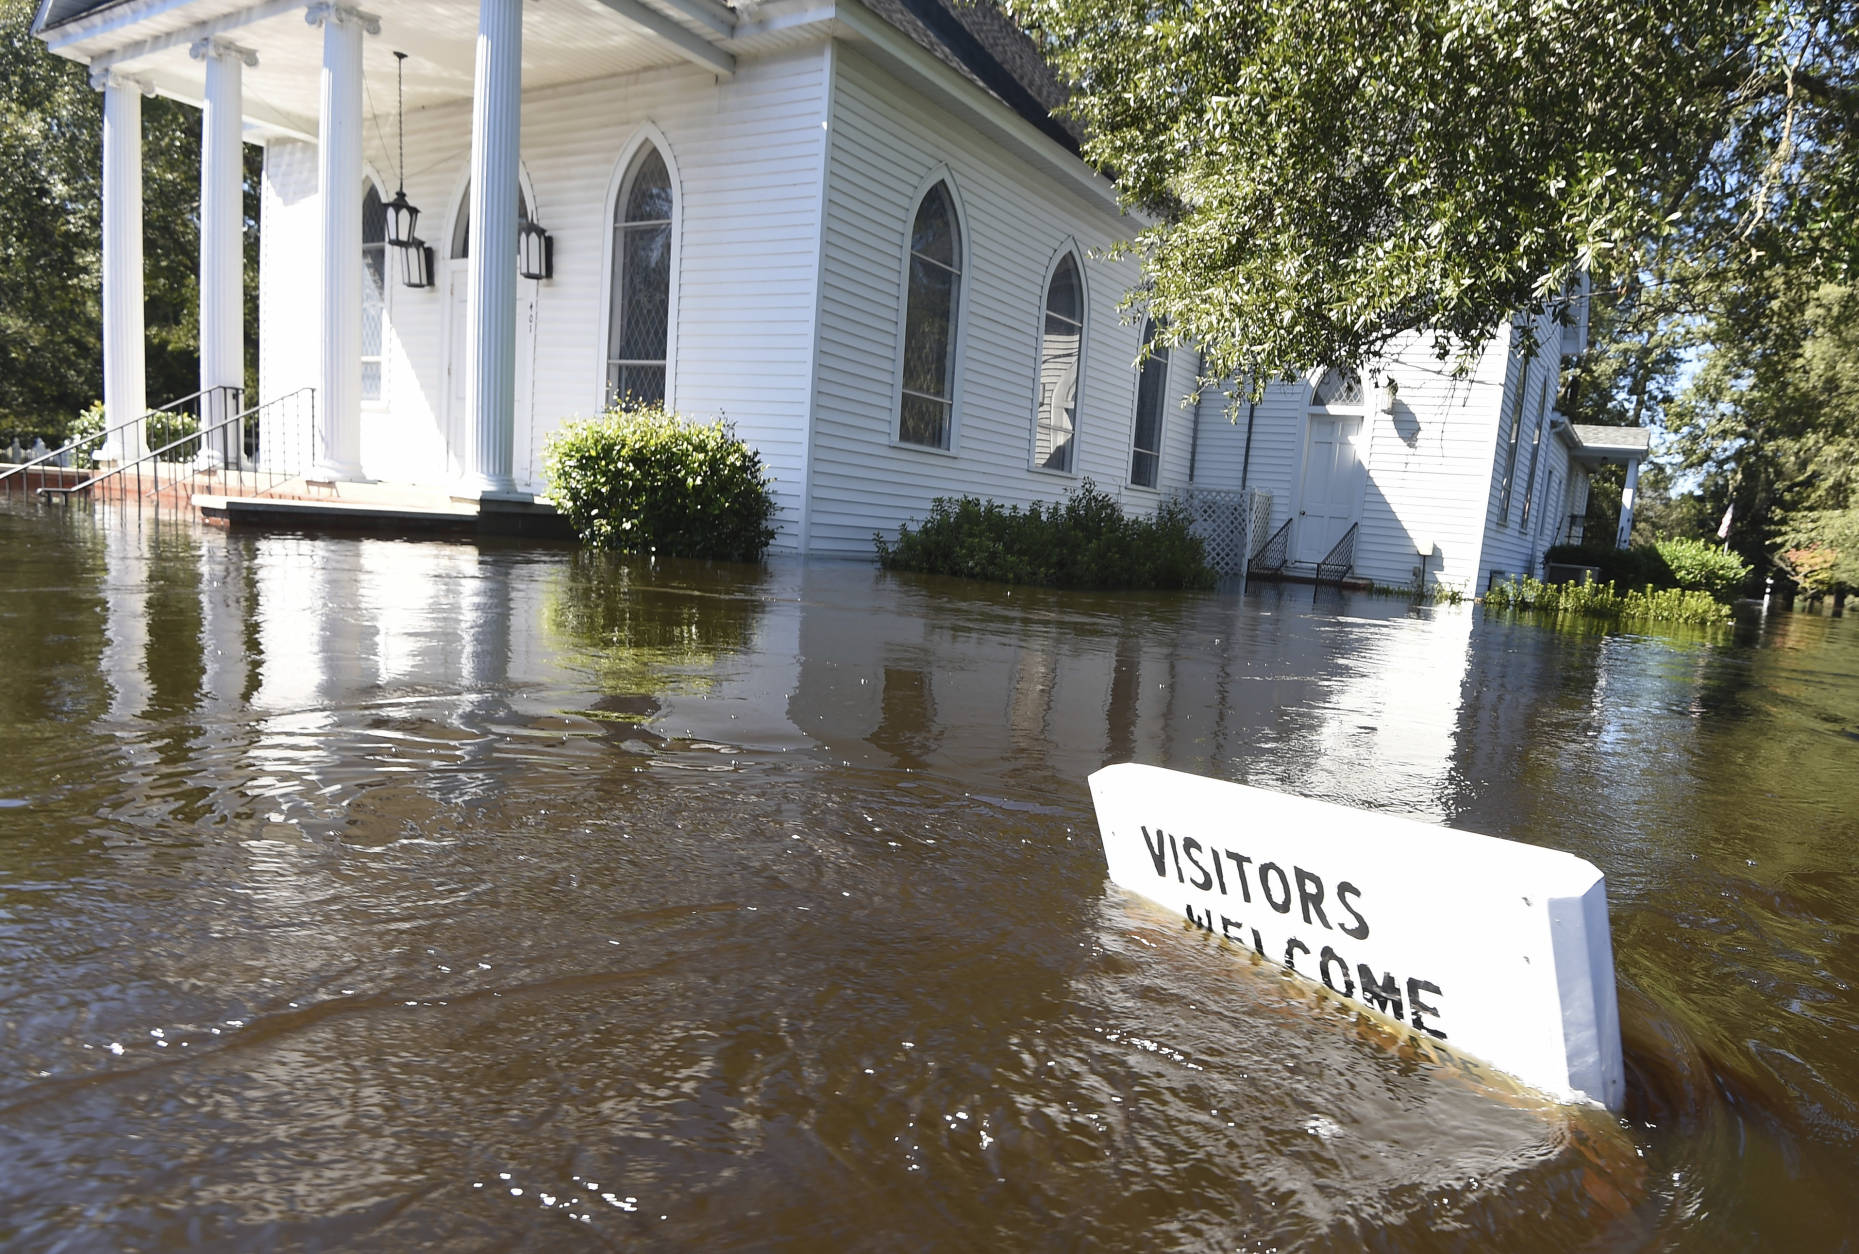 A welcome sign is submerged in floodwaters in front of the Nichols Methodist Church on Tuesday, Oct. 11, 2016, in Nichols, S.C. About 150 people were rescued by boats from flooding in the riverside village of Nichols on Monday. (AP Photo/Rainier Ehrhardt)